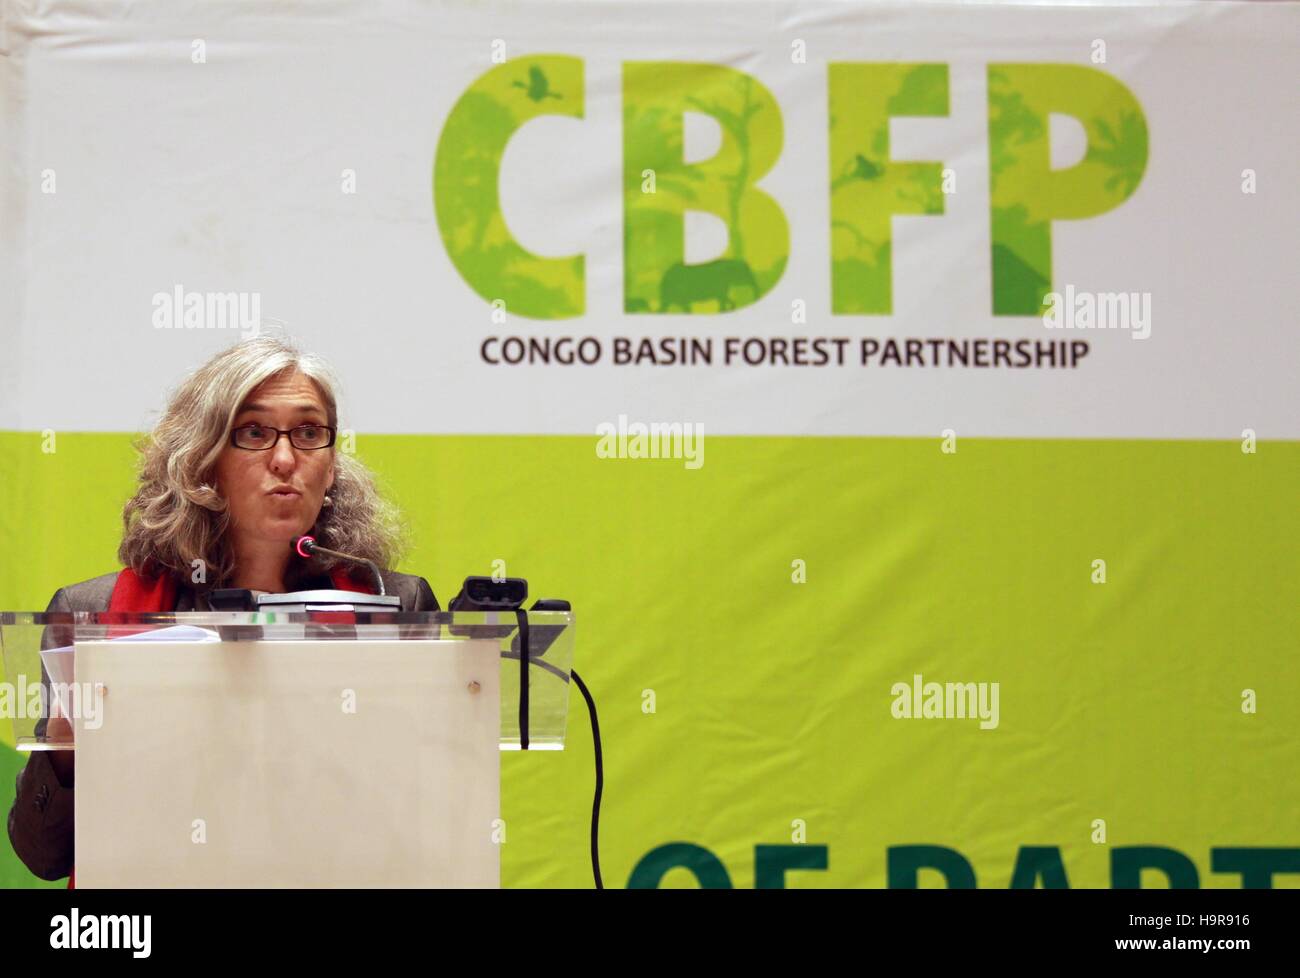 Kigali, Kigali, Rwanda. 24th Nov, 2016. Members of the Congo Basin Forest Partnership (CBFP) attend the opening session and high level speeches for the 16th CBFP Meeting of Parties at Kigali Convention Centre. Francesca di Mauro, Head of Unit for Central Africa, European Commission, speaks from the podium. The CBFP is an informal multi-stakeholder platform (voluntary and non-binding ''“ without any legal status) involving 85 partners, including ten Central African countries, donor agencies and governments, international organizations, NGOs, scientific institutions and private sector organ Stock Photo